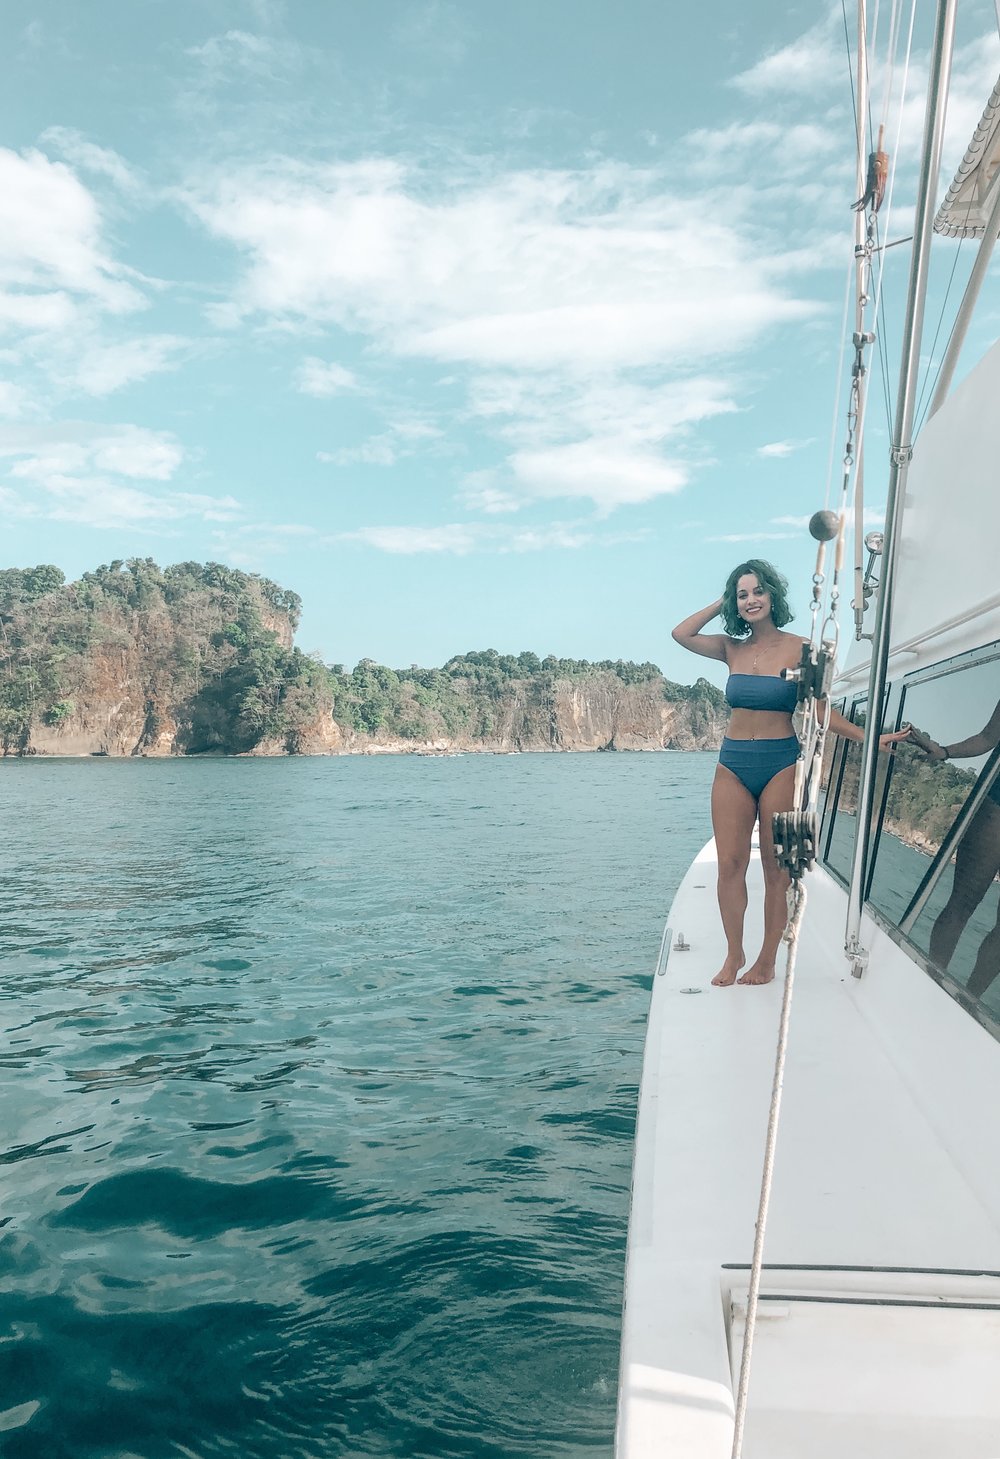 Coral Yacht Adventures in Costa Rica.jpg